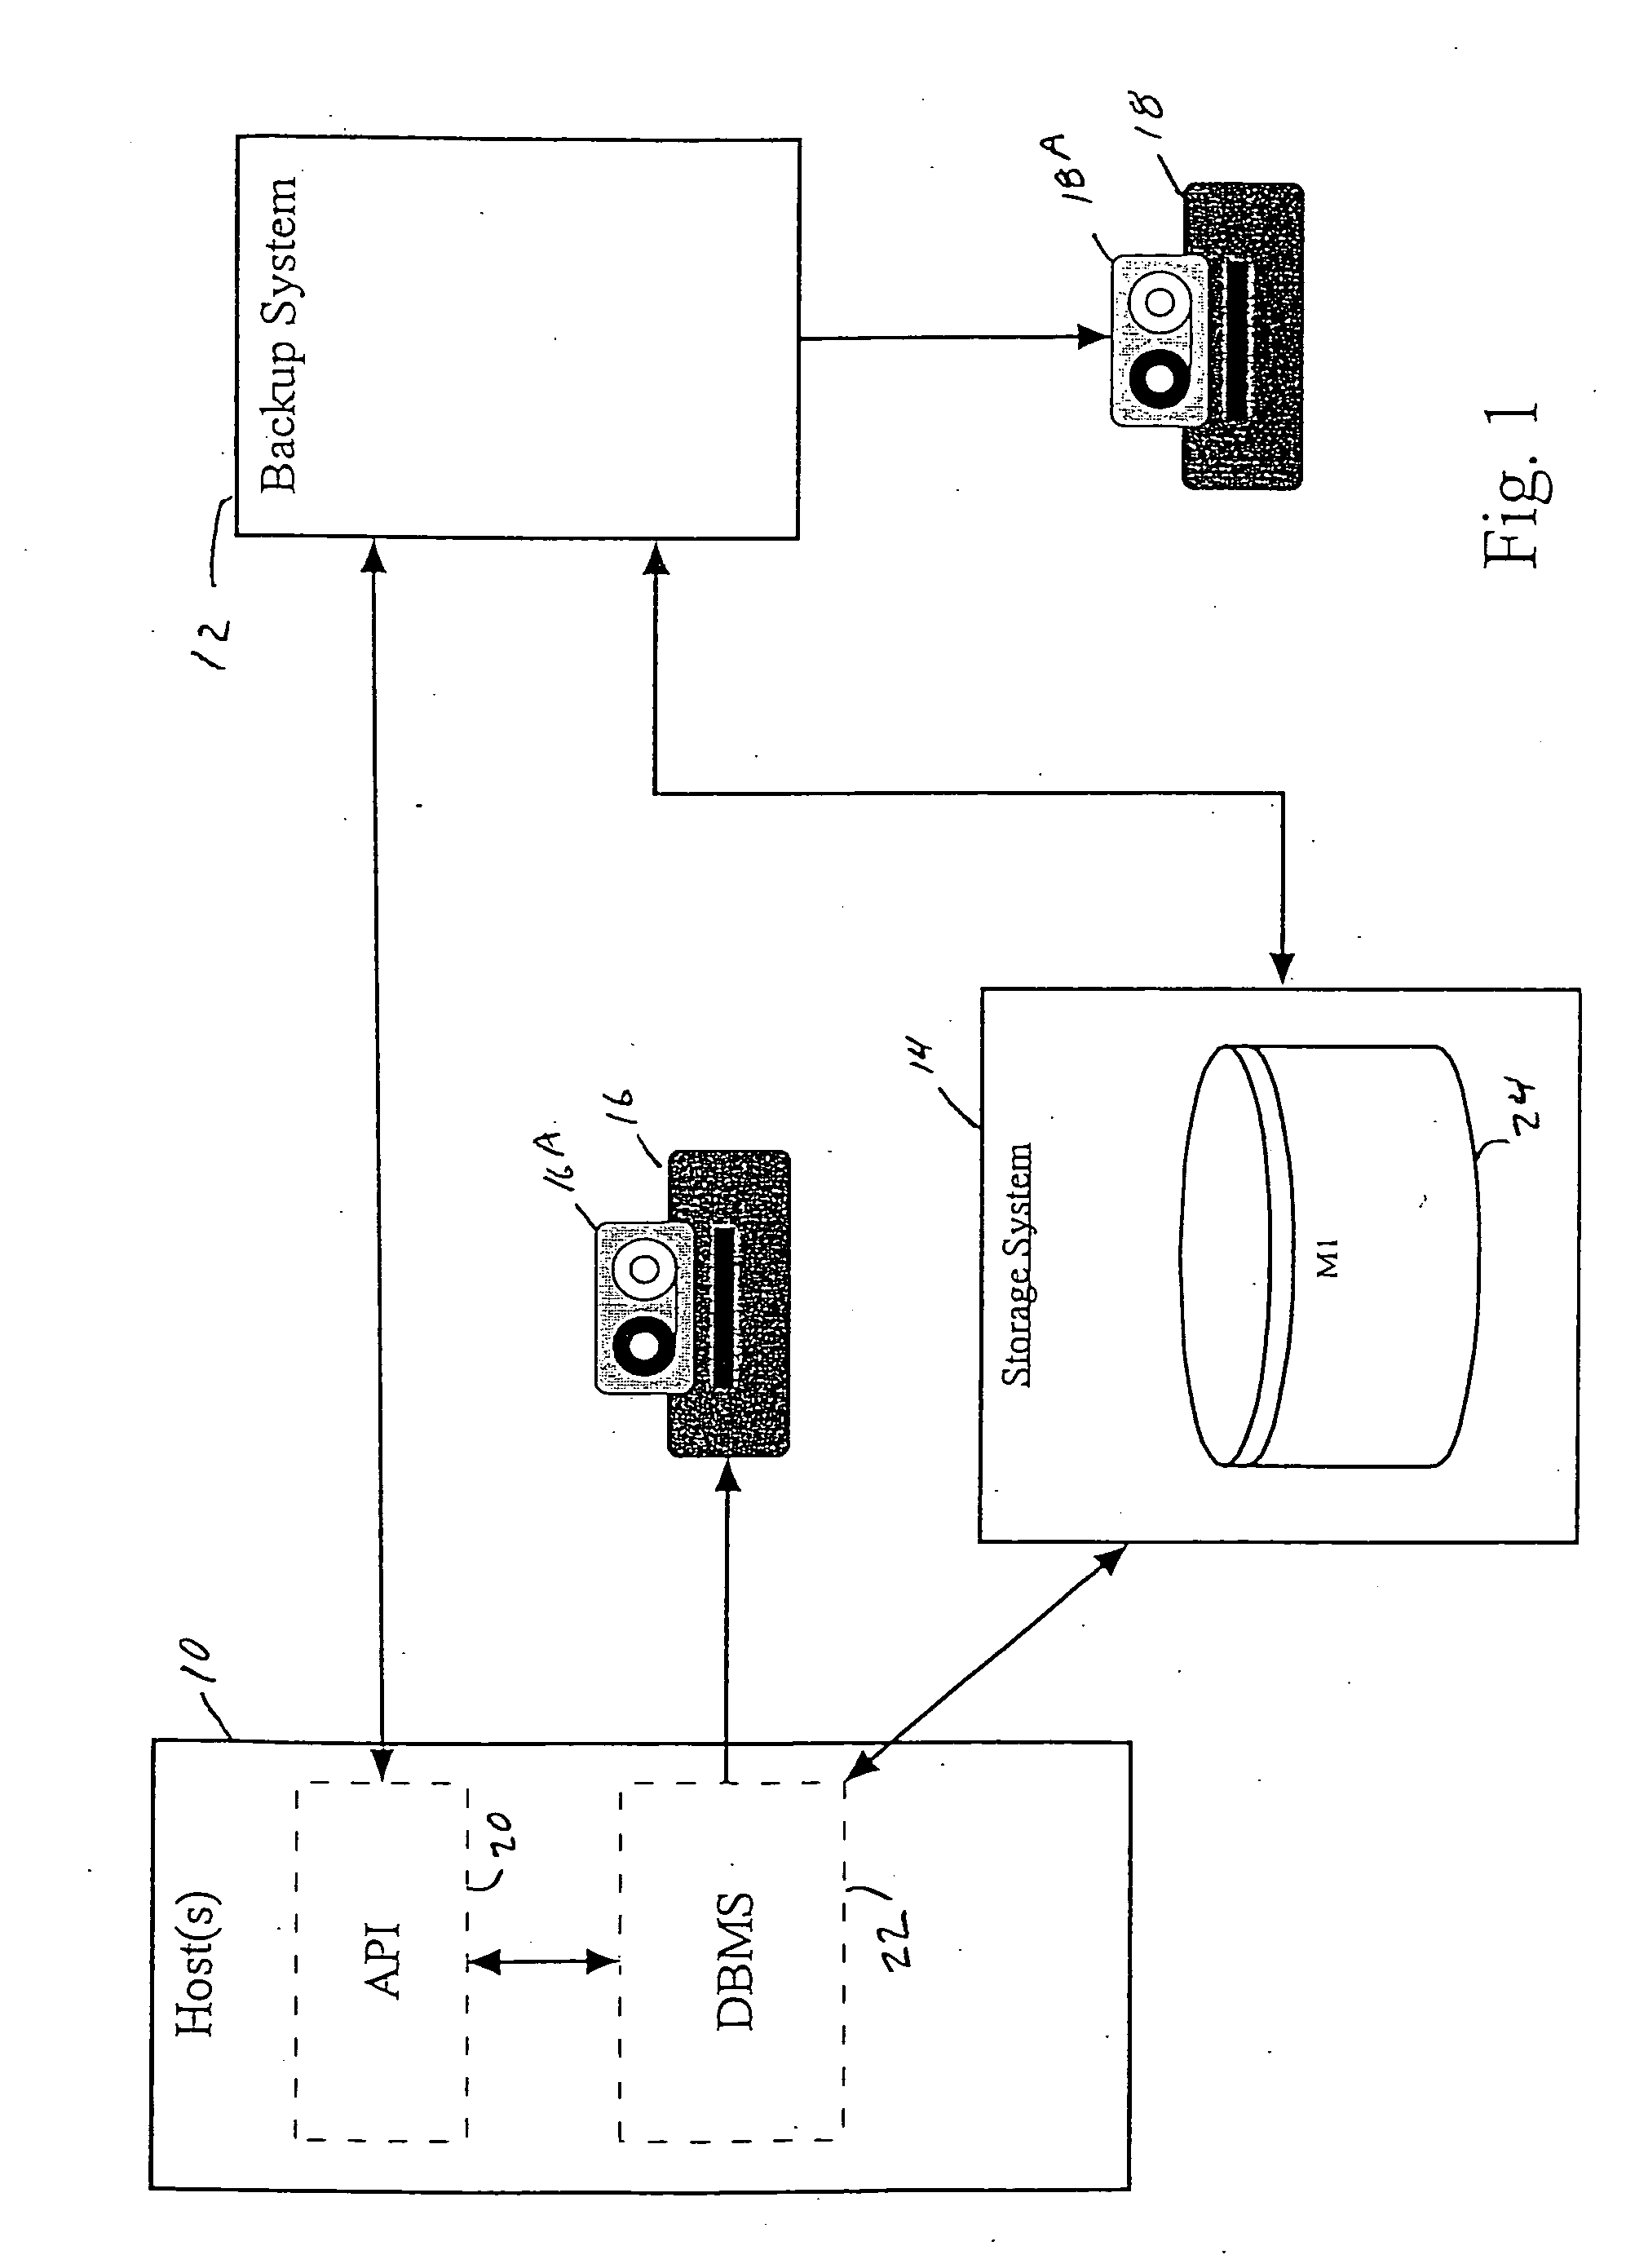 Method and apparatus for storage and retrieval of very large databases using a direct pipe